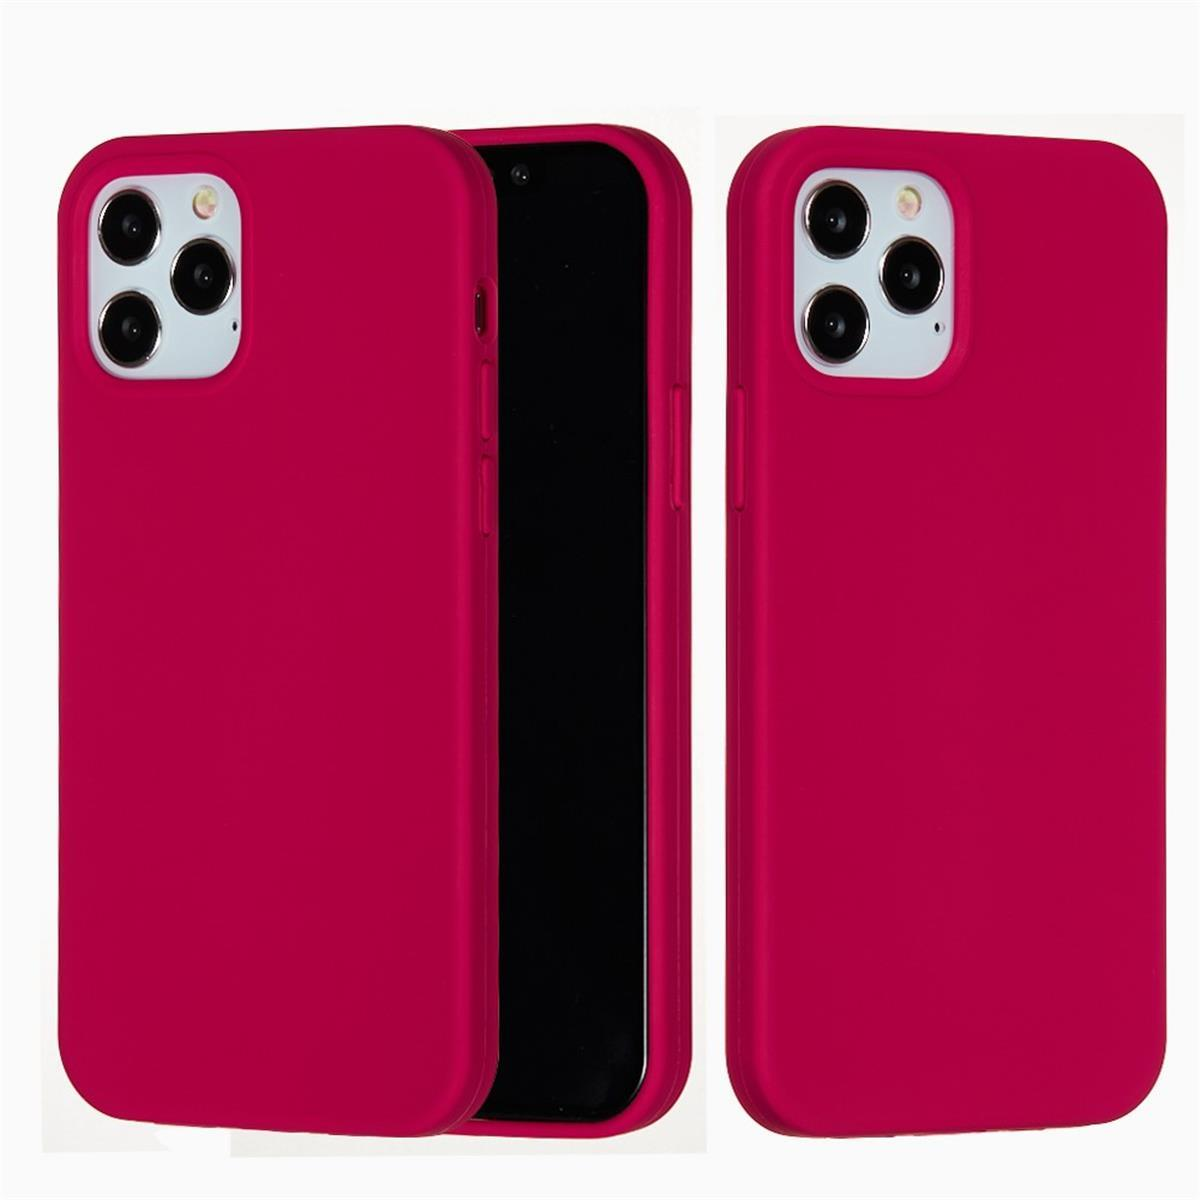 COVERKINGZ Handycase aus Silikon, Rot Zoll], [6,7 13 iPhone Apple, Pro Max Backcover